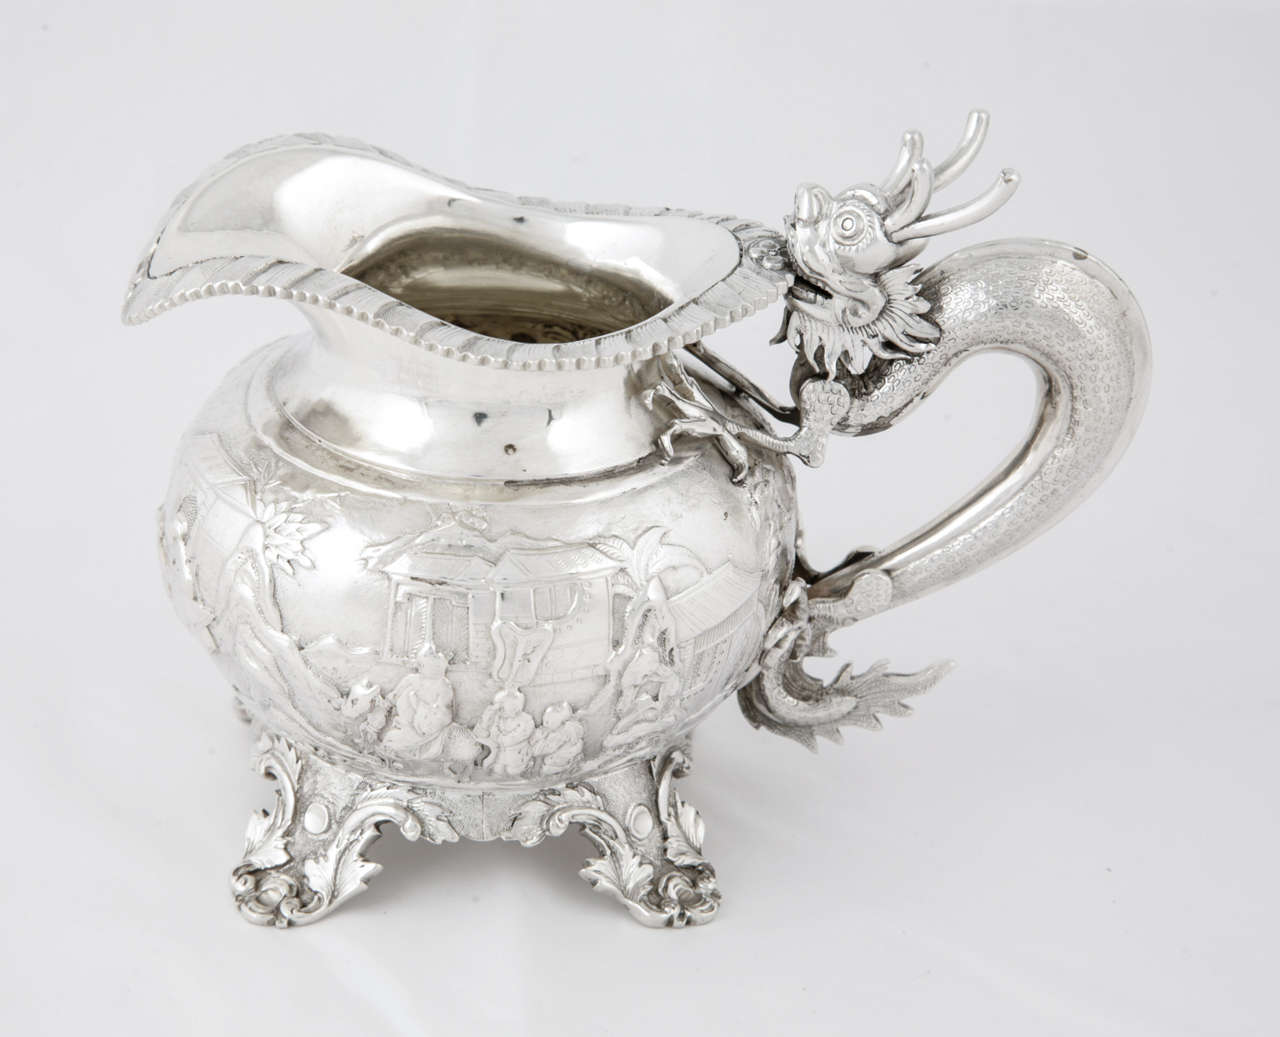 Chinese Export Silver Teaset 3